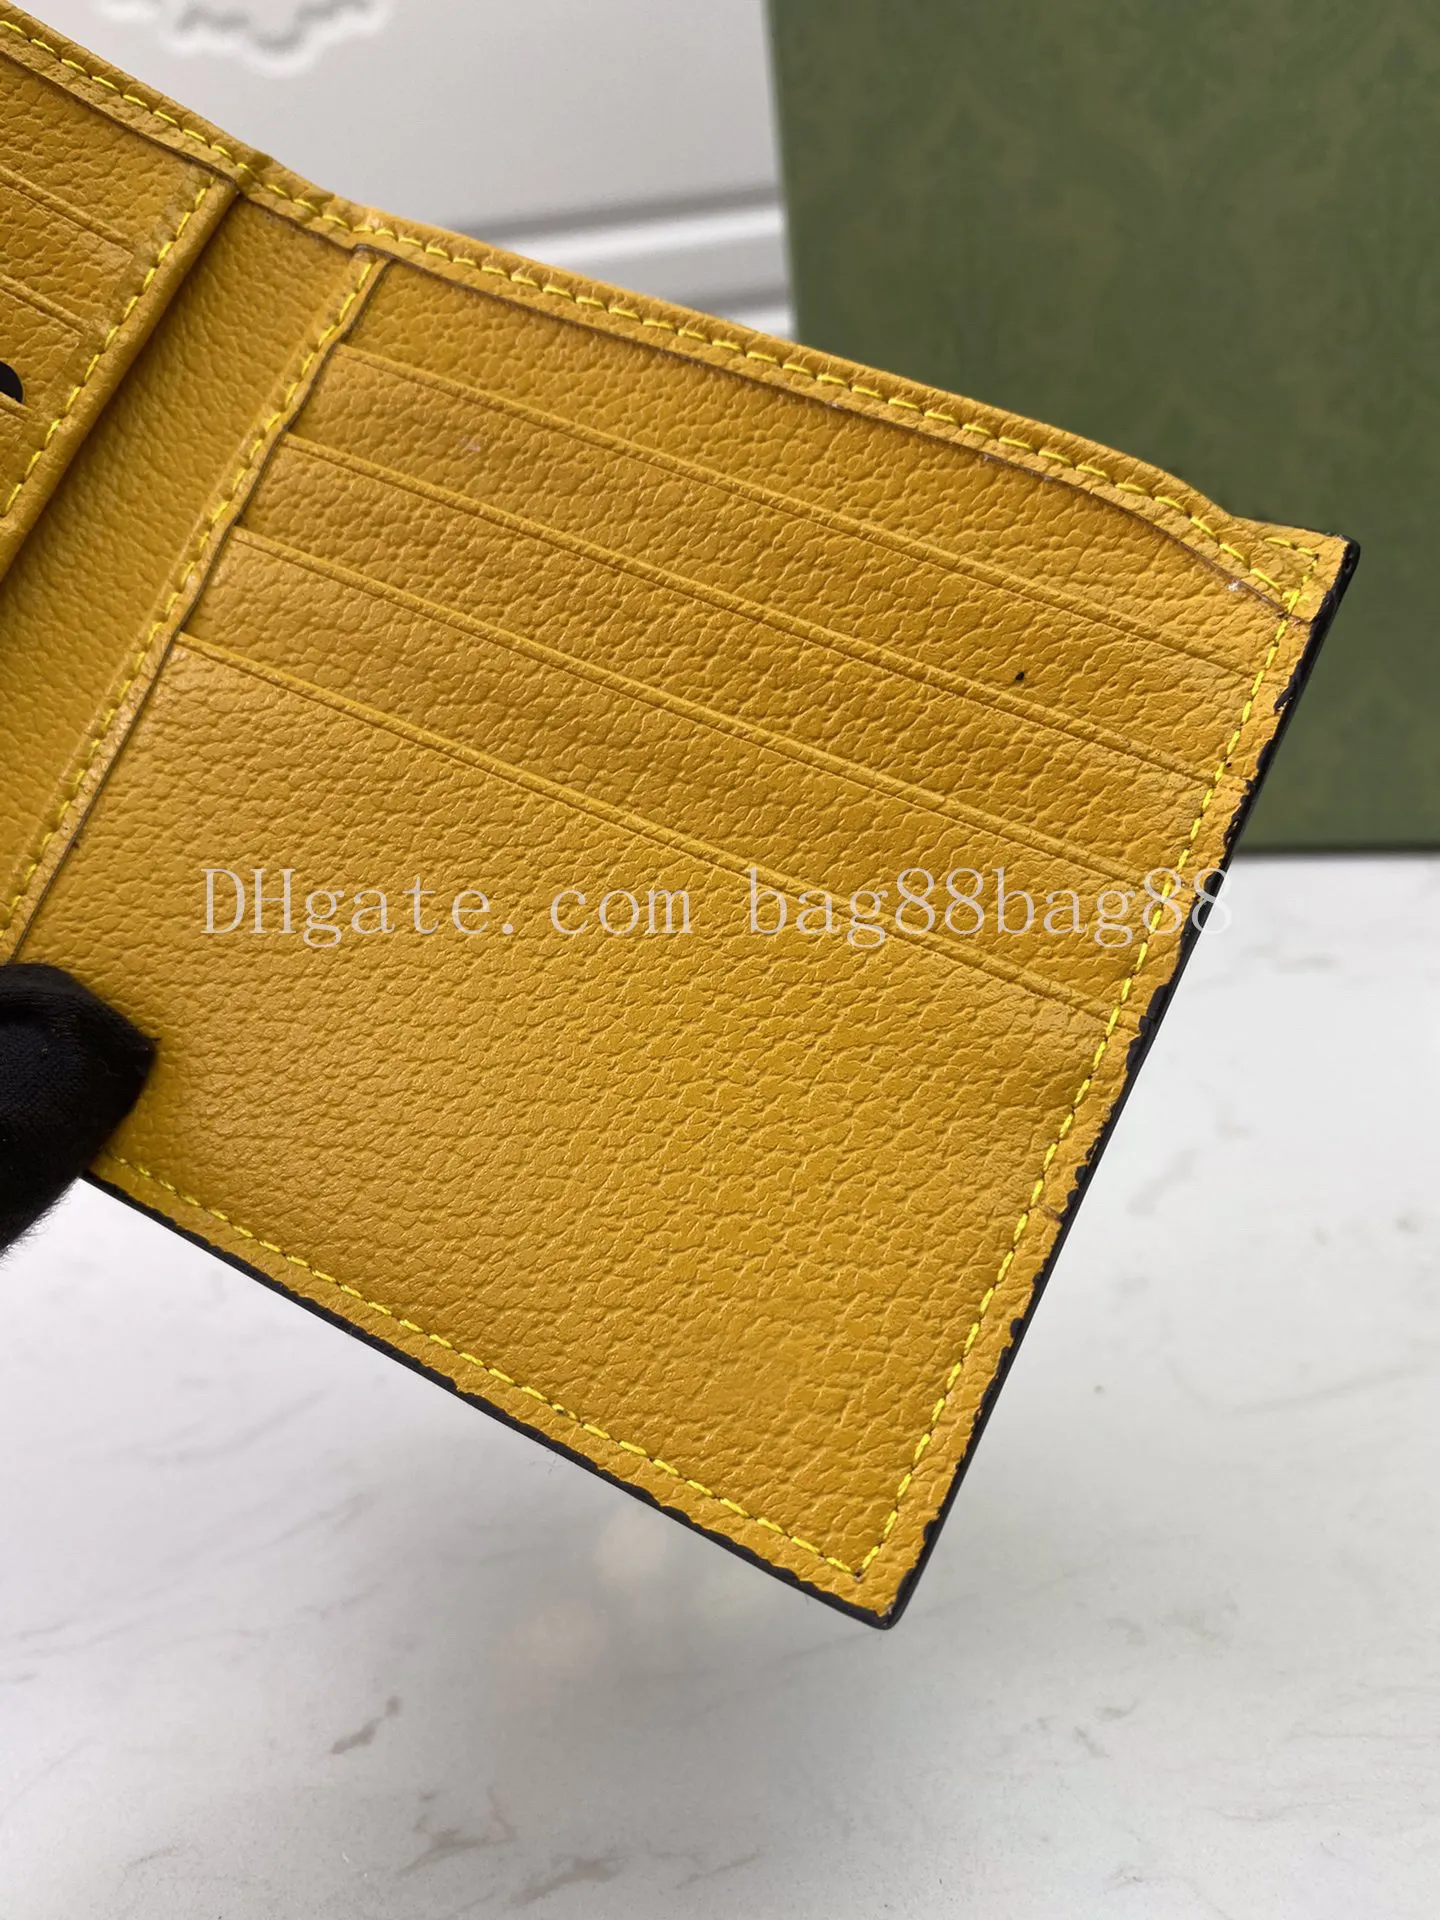 Designer wallet Mens Womens purses High quality premium leather WEB Green Red wallets Brown 473954225J